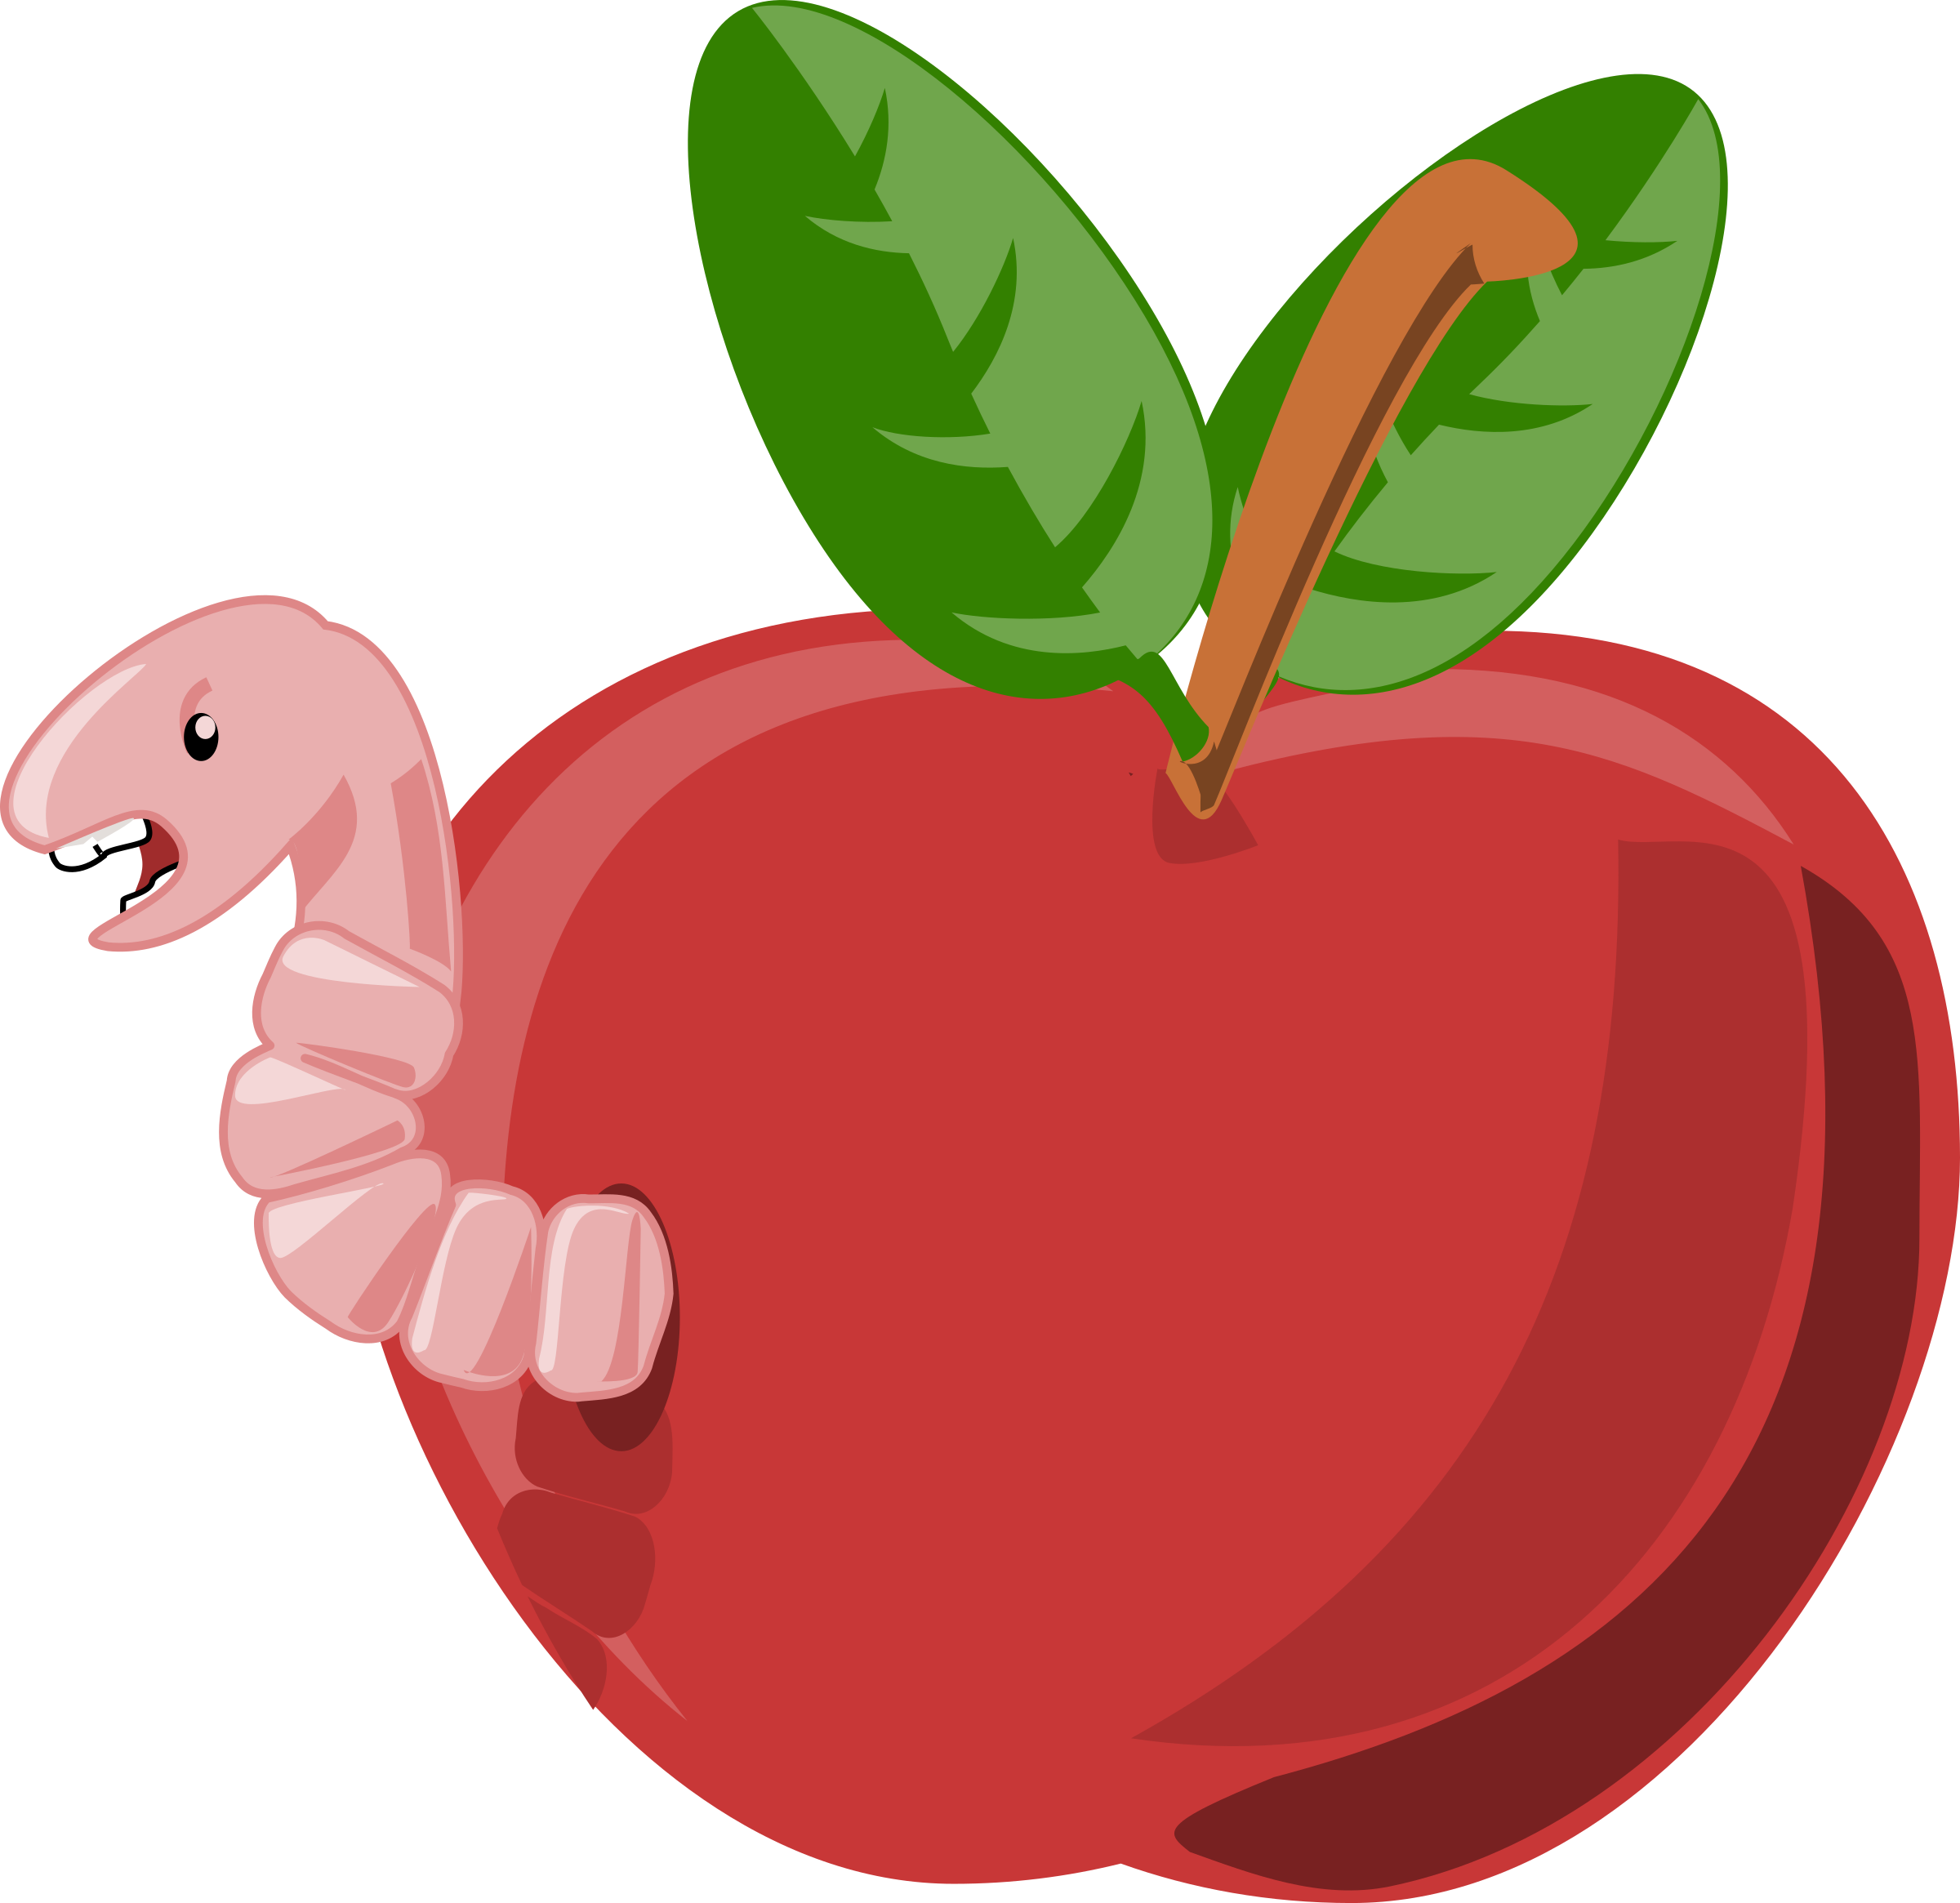 Worm clipart stomping. Cartoon apple with big